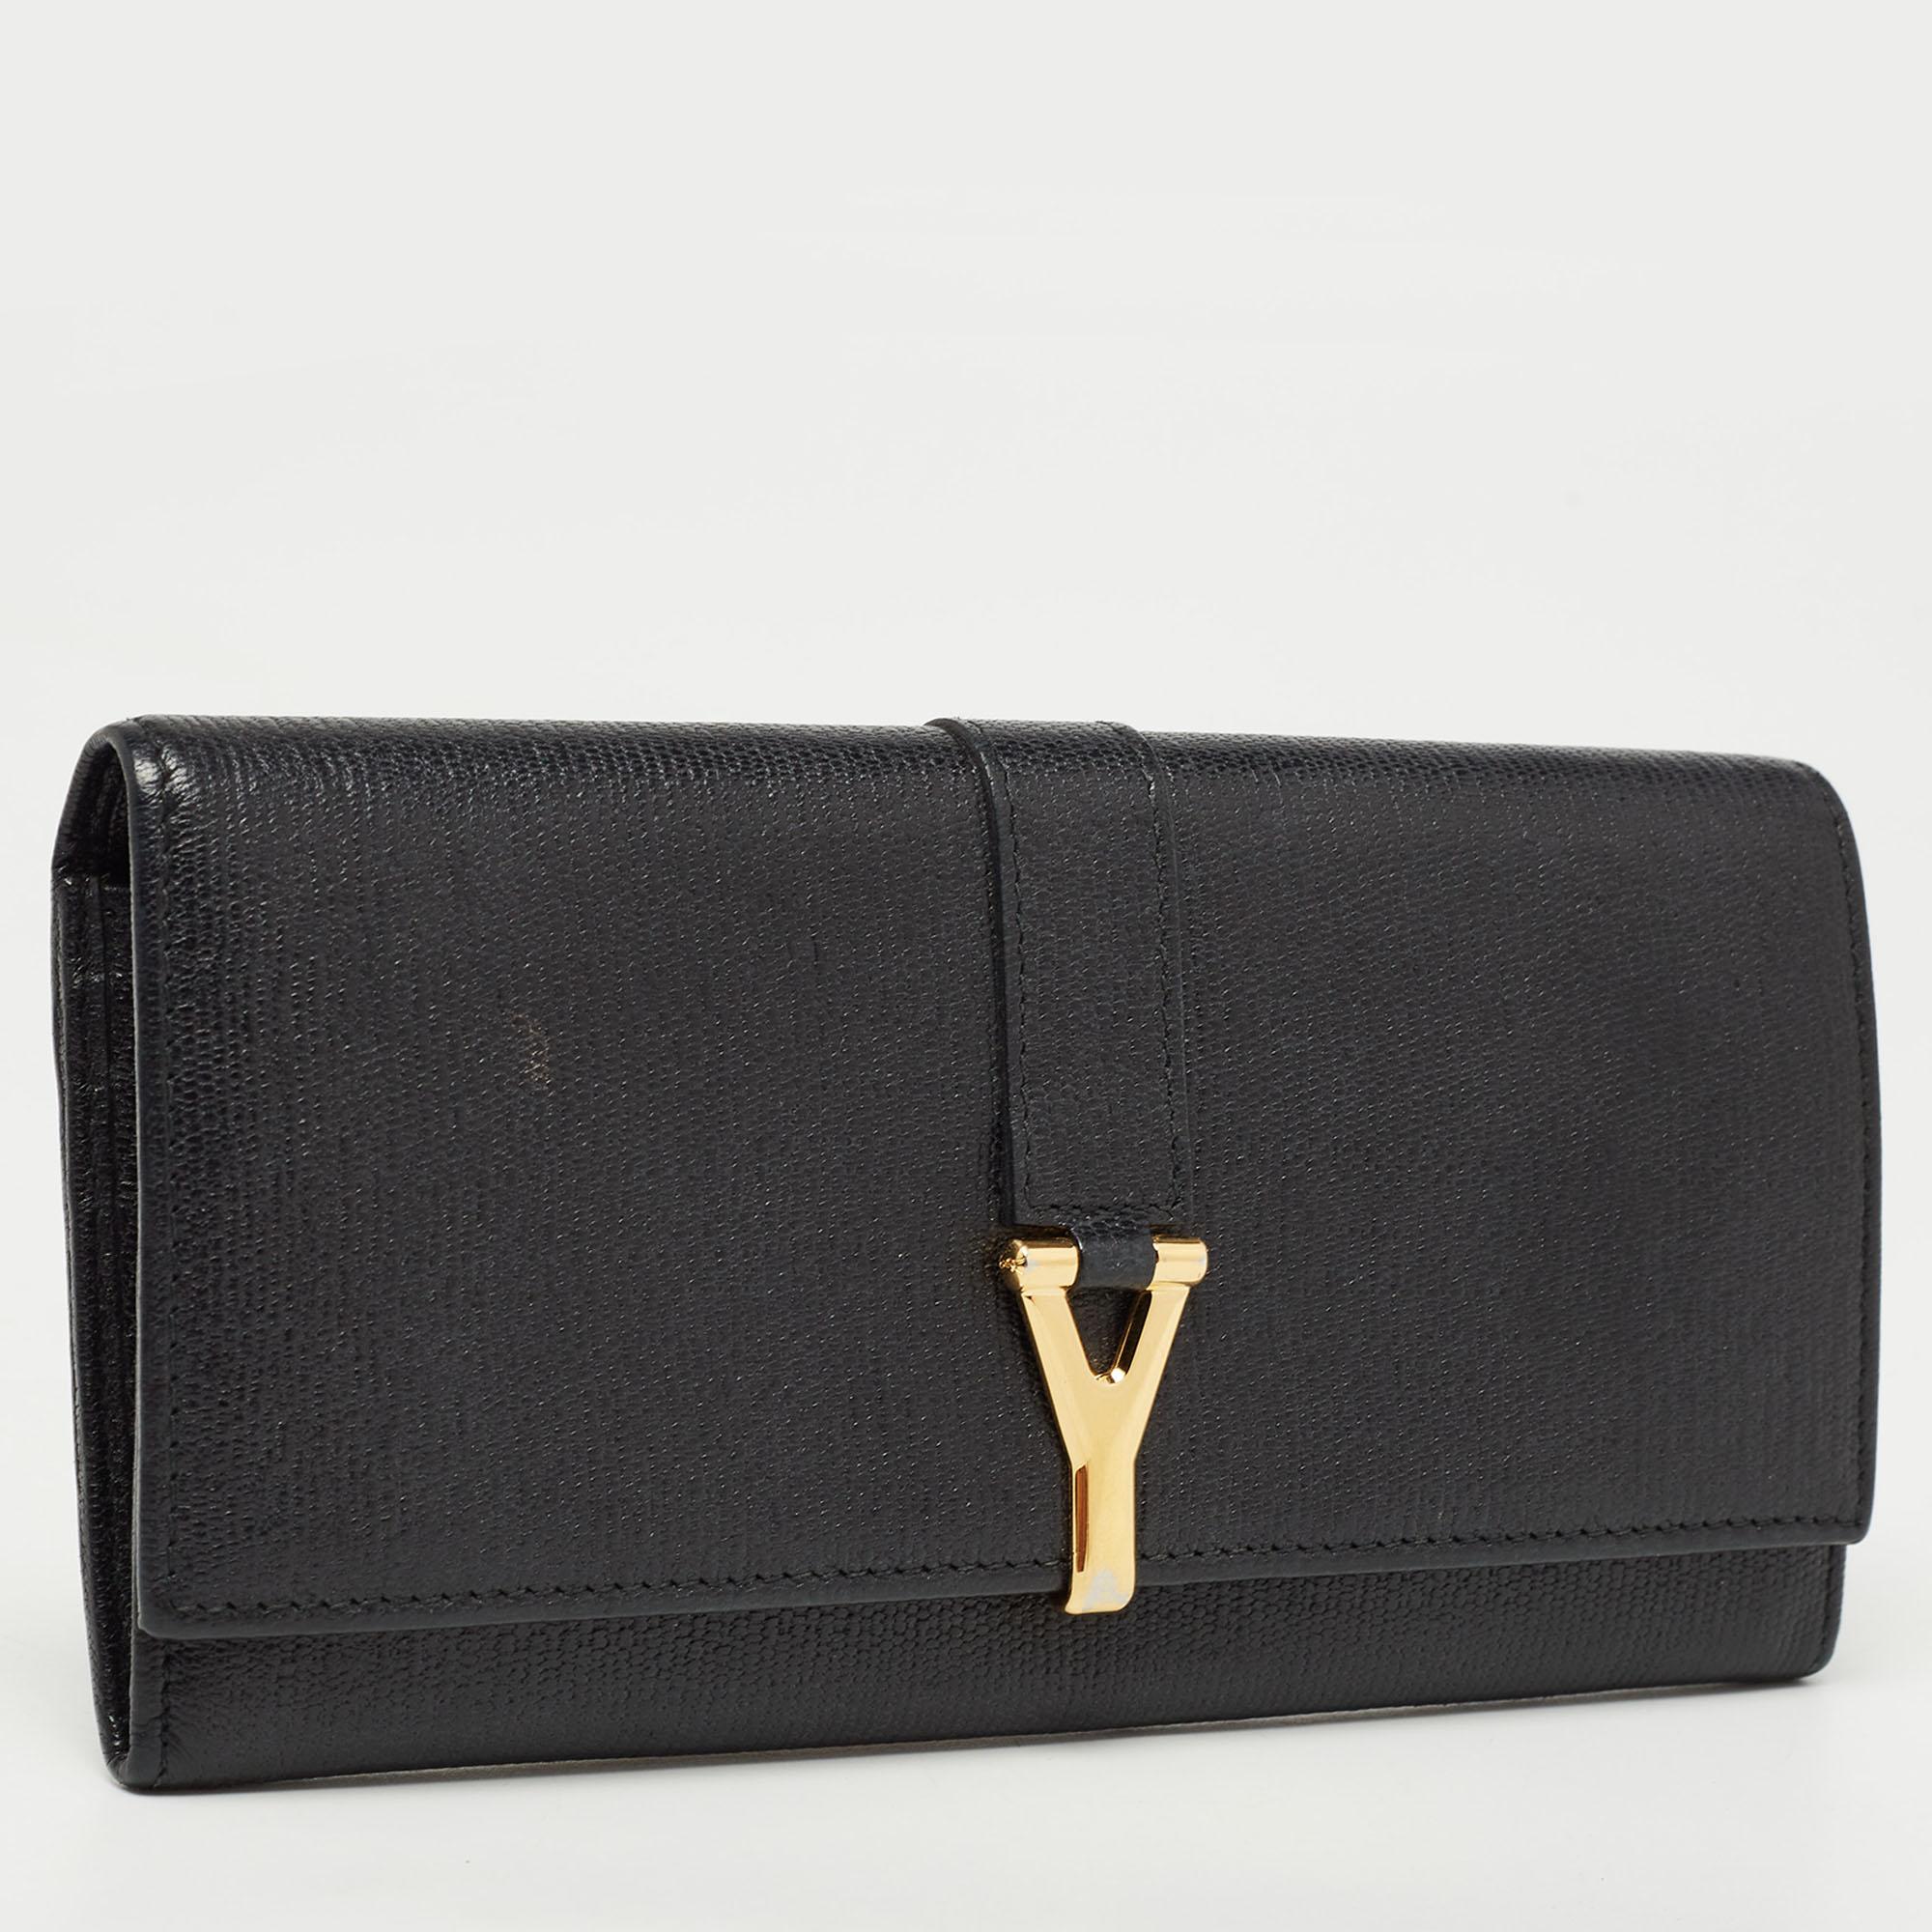 Designer wallets are ideal companions for ample occasions! Here we have a fashion-meets-functionality piece crafted with precision. It has been equipped with a well-sized interior that can easily fit all your essentials.

Includes
Original Dustbag,